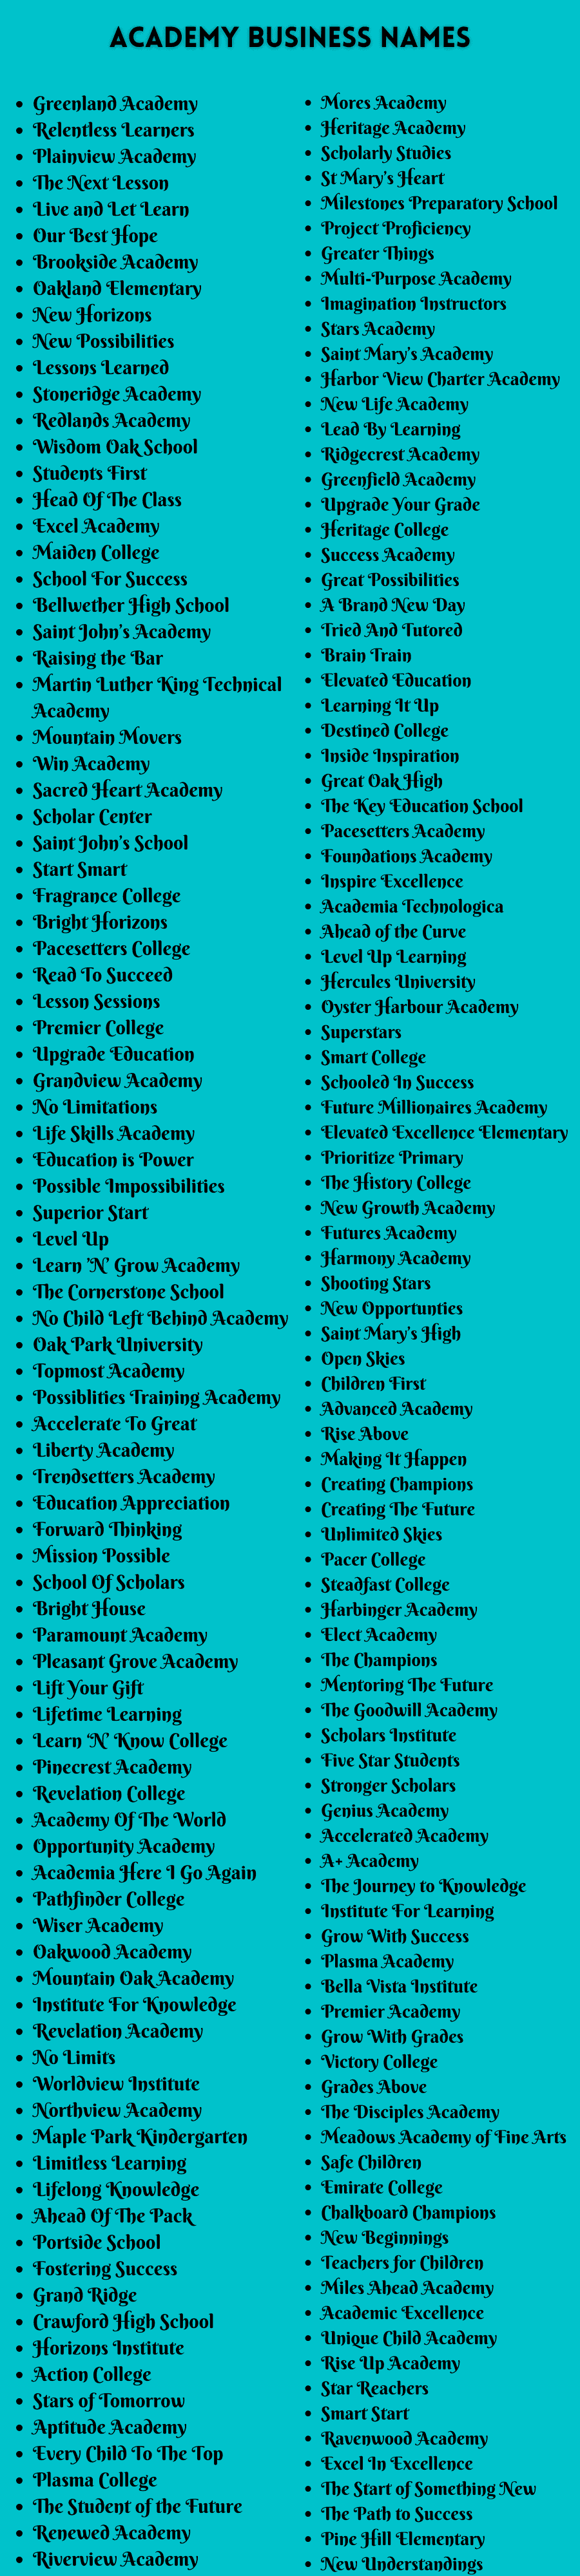 Academy Business Names